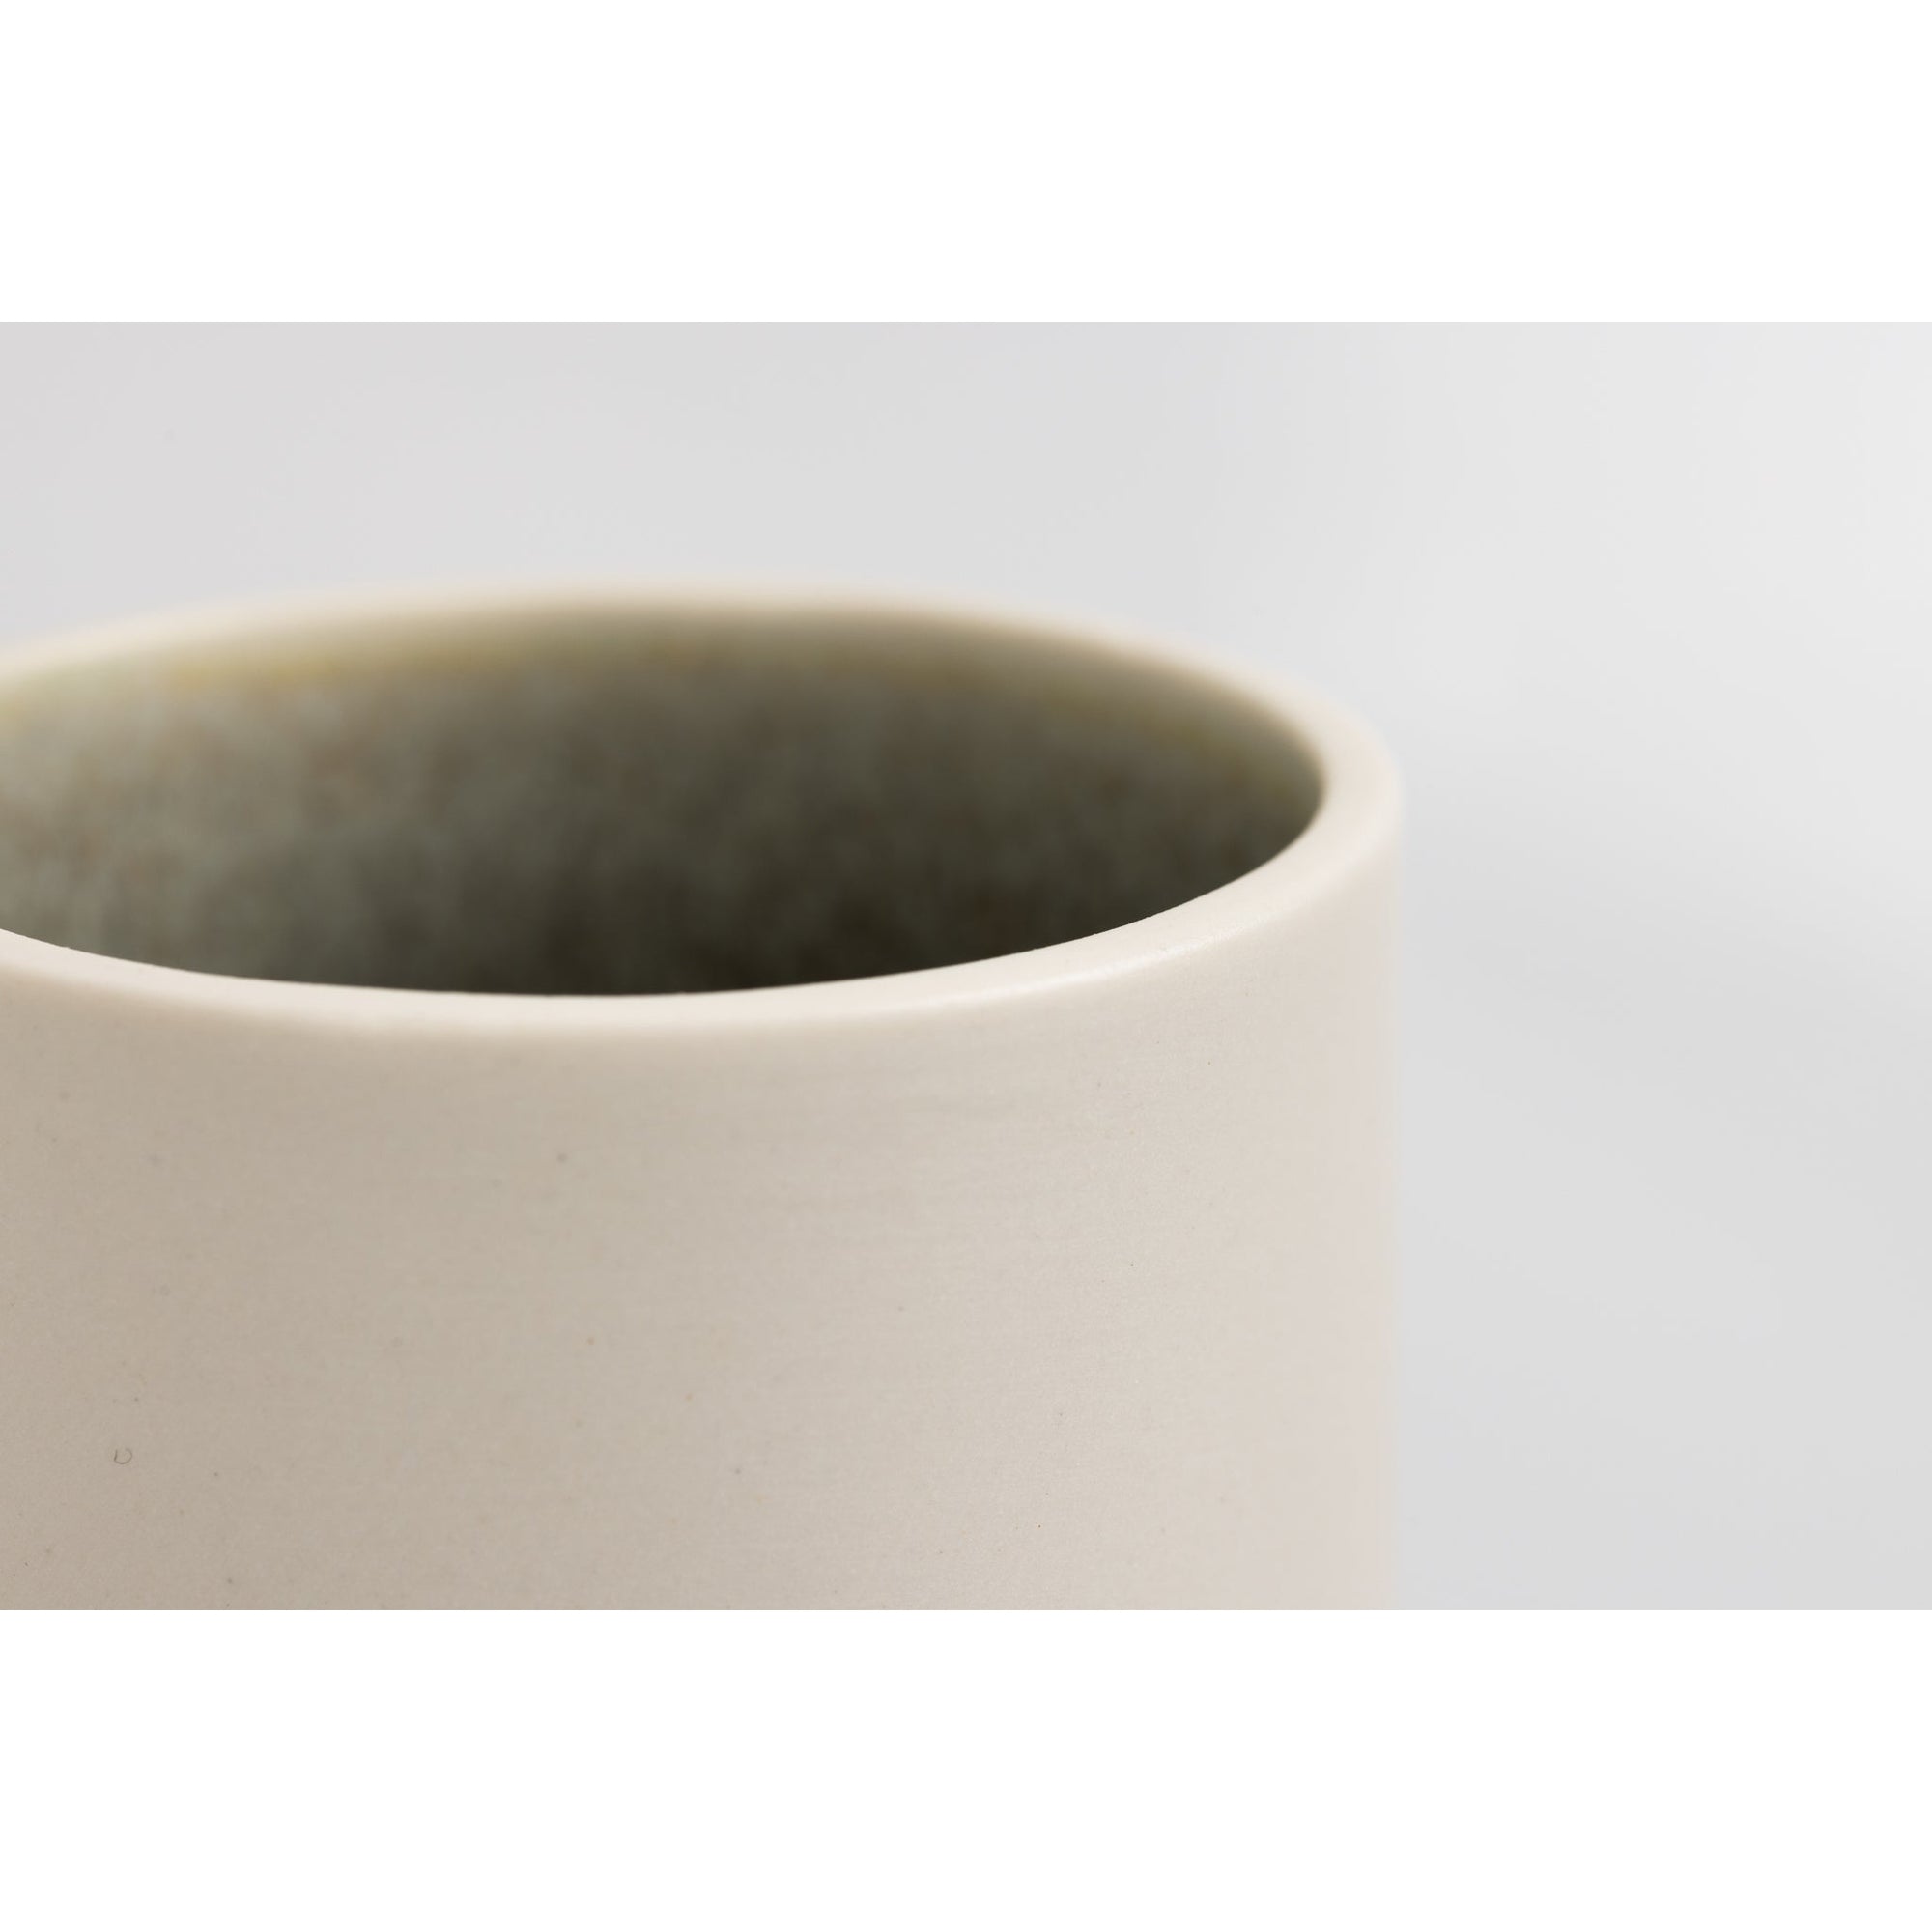 KSN1 South Downs I, Tapered Vessel by Kate Schuricht, available at Padstow Gallery, Cornwall